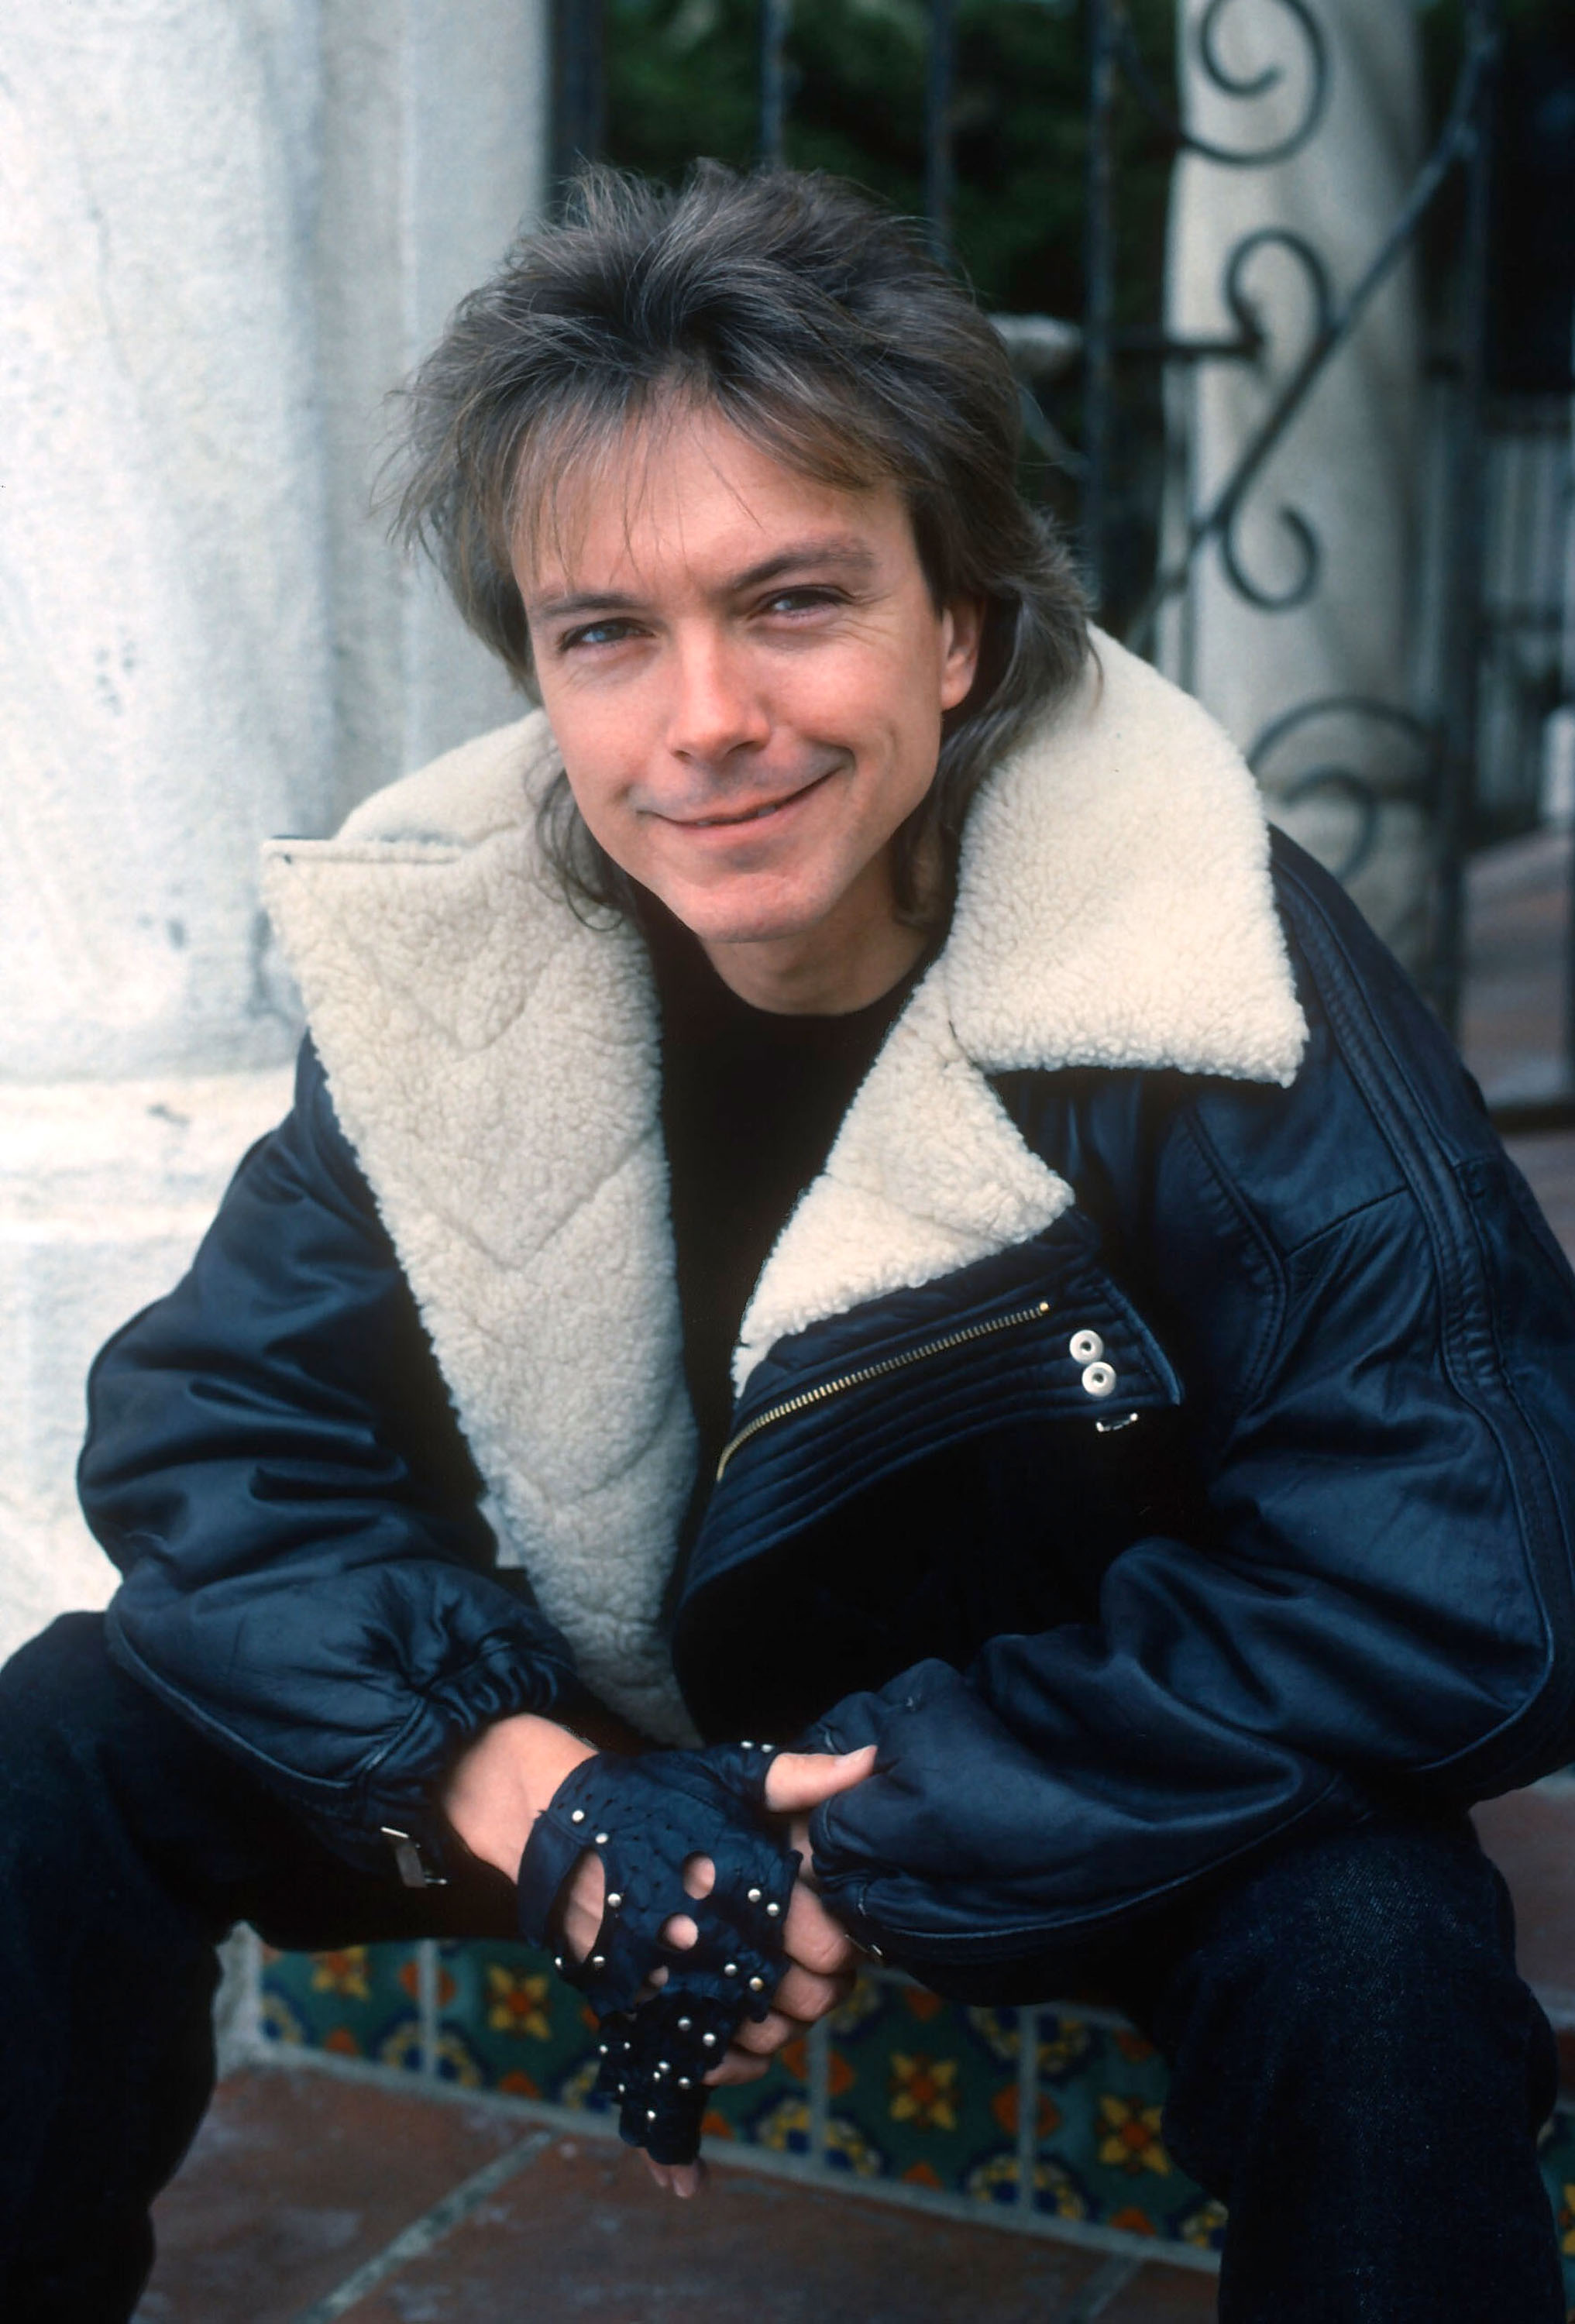 David Cassidy on February 7, 1989 in Los Angeles, California. | Source: Getty Images